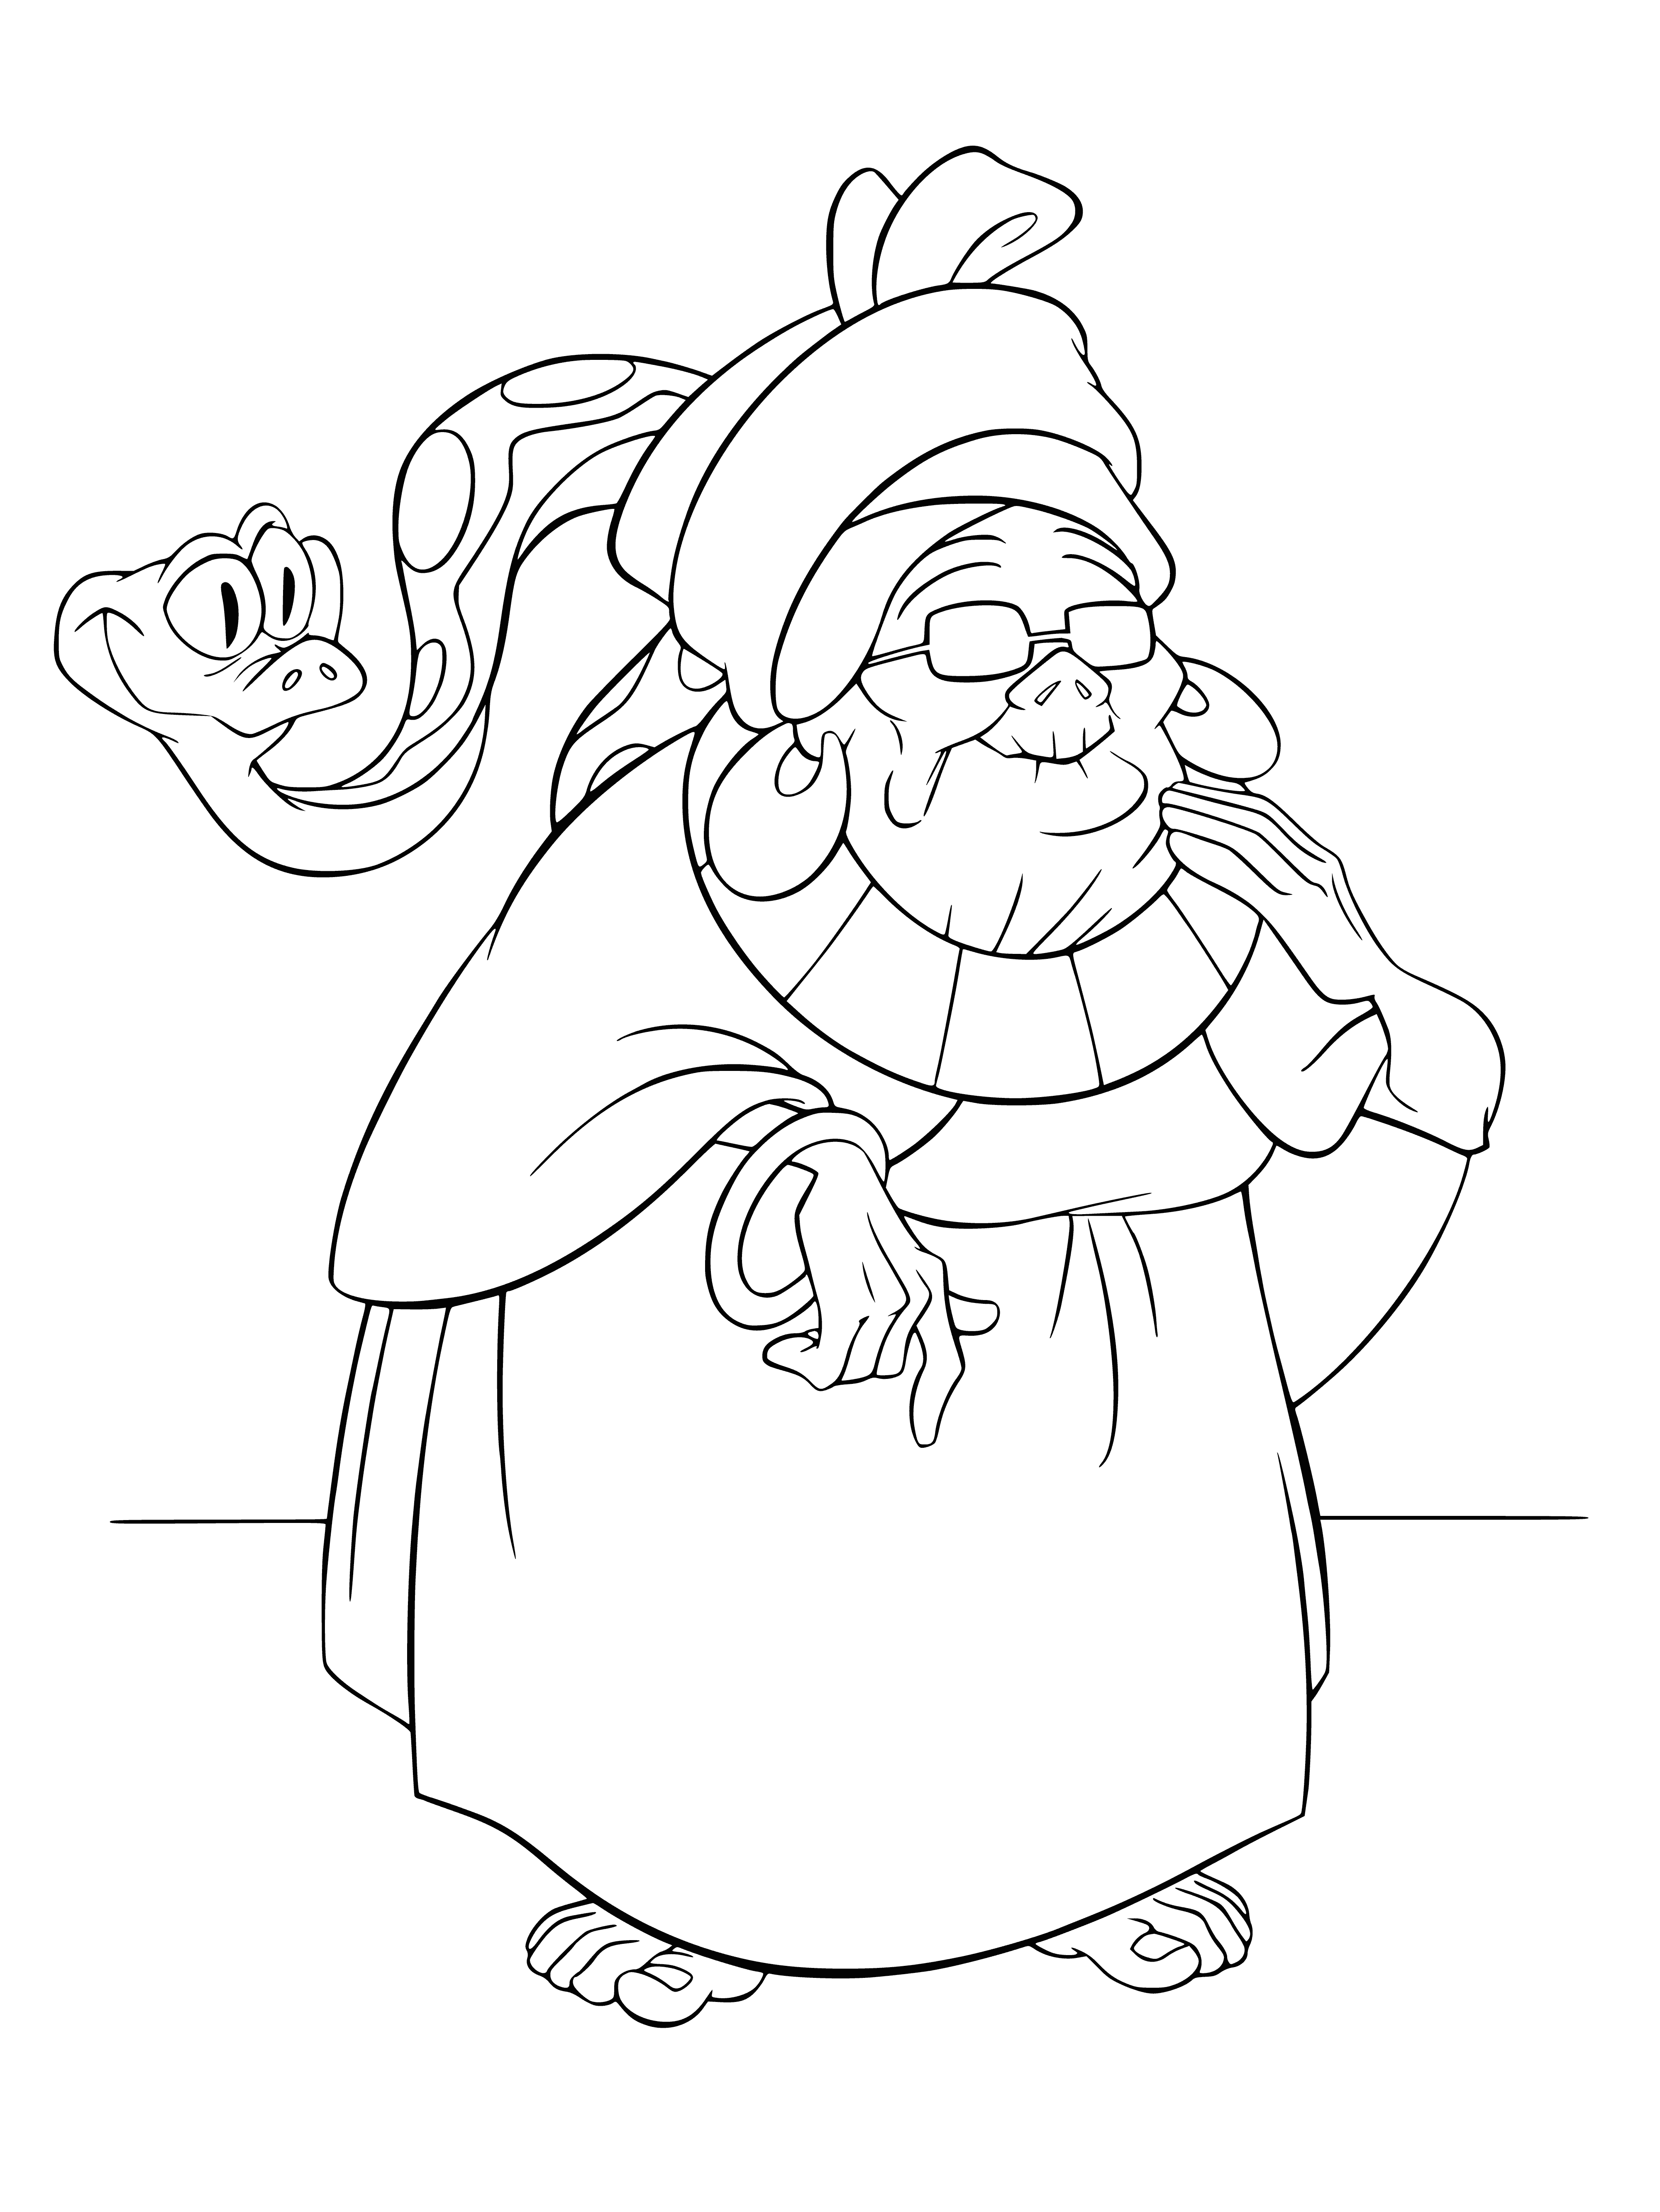 coloring page: An older woman with dark brown skin, a large Afro, and a gap-toothed smile is surrounded by small animals holding a staff.